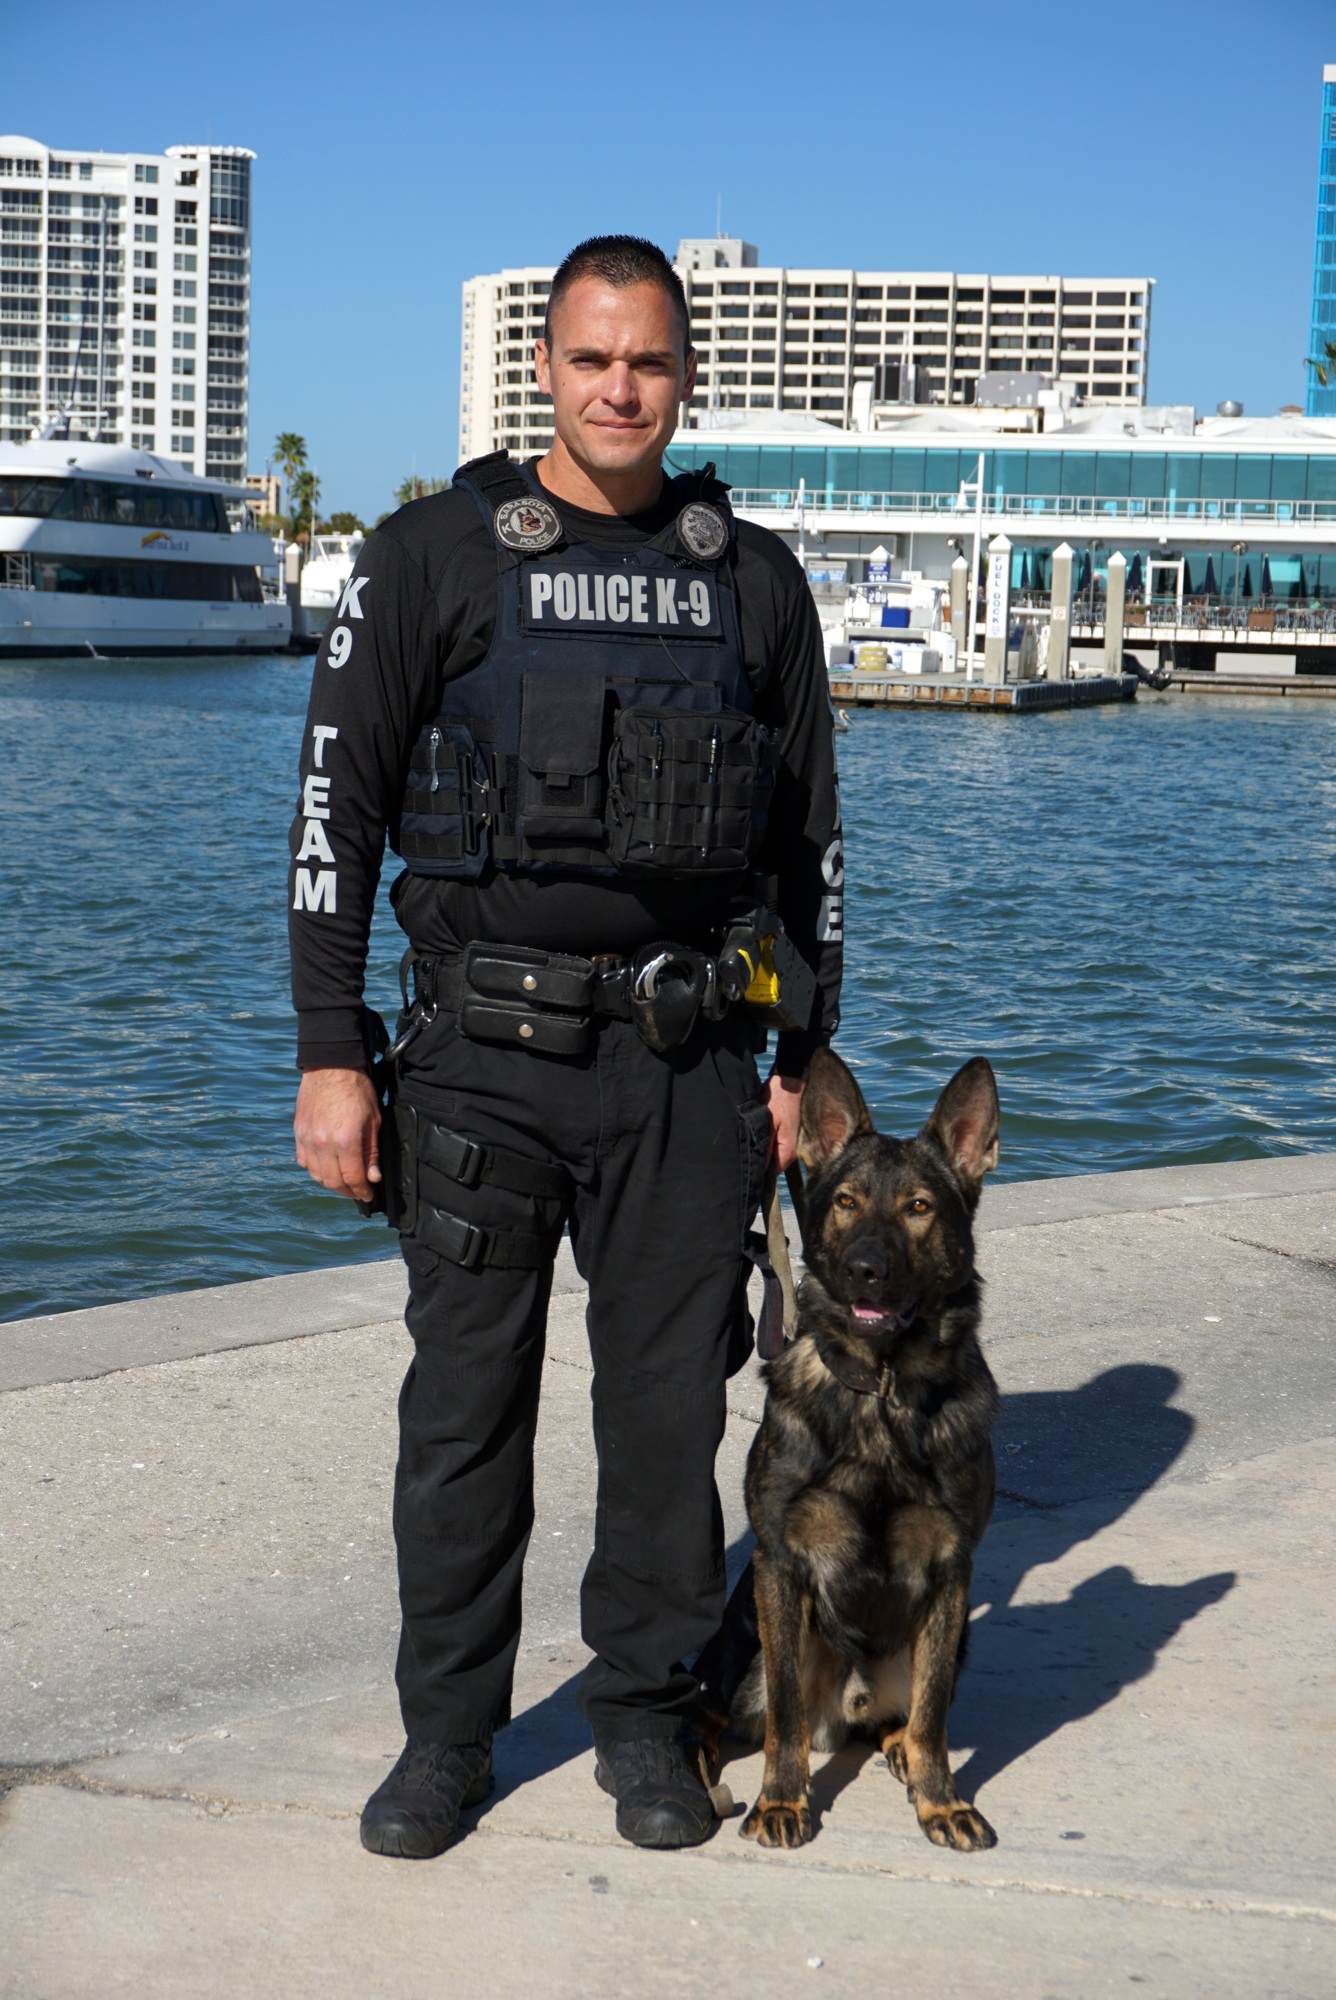 Courtesy photo. K-9 Officer Nicholas Dominis with Coti after being certified.